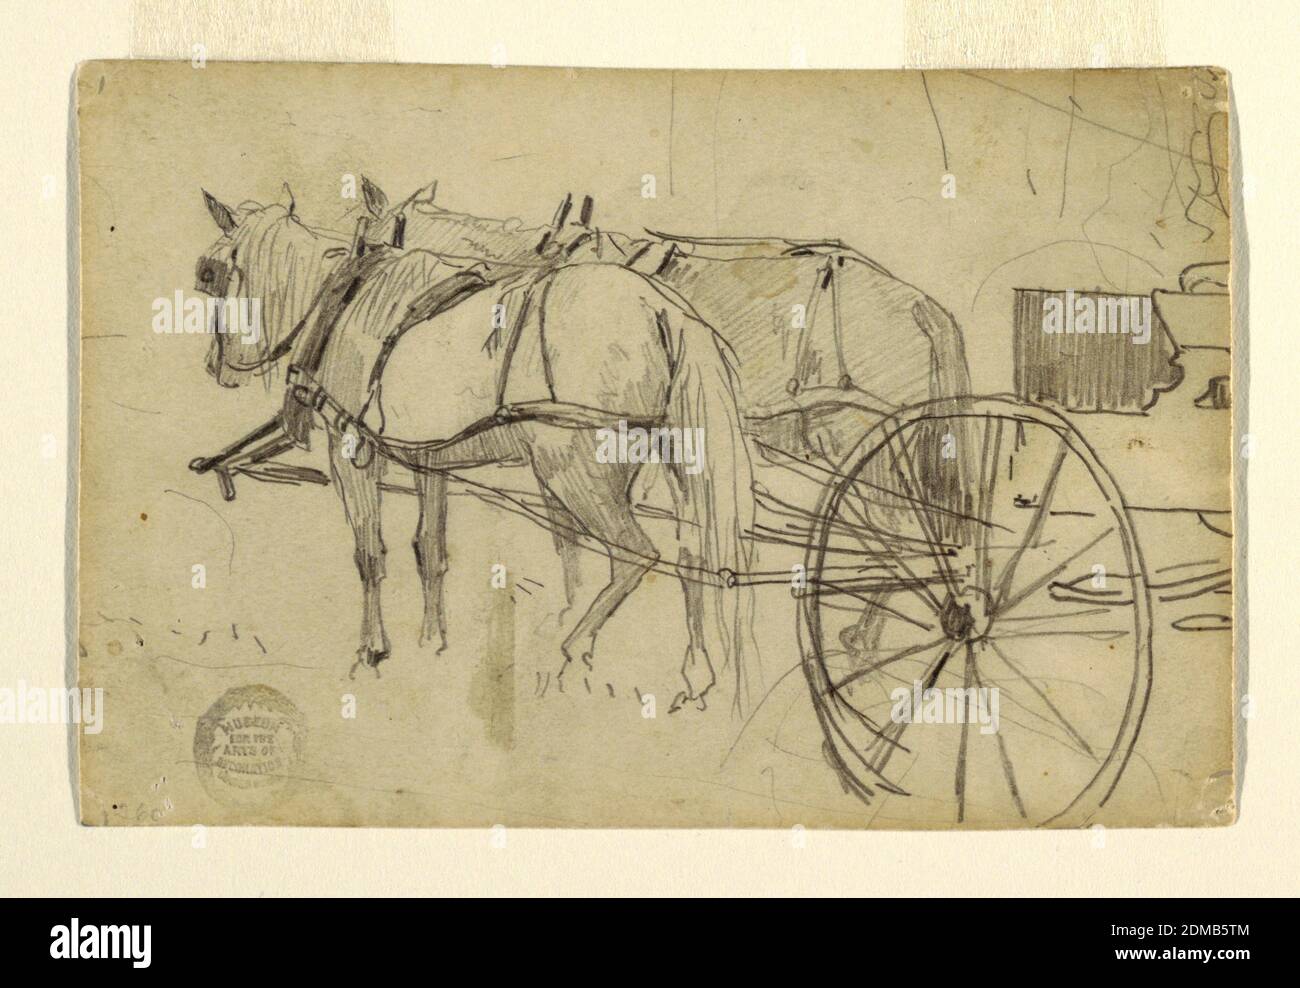 Horses and Wagon (The Picnic Excursion), Winslow Homer, American, 1836–1910, Graphite on off-white wove paper, Recto: Horizontal view of two horses harnessed to a wagon, a portion of which is shown at the right., Verso: Slight horizontal sketch of people at a fireside., USA, 1868, nature studies, Drawing Stock Photo